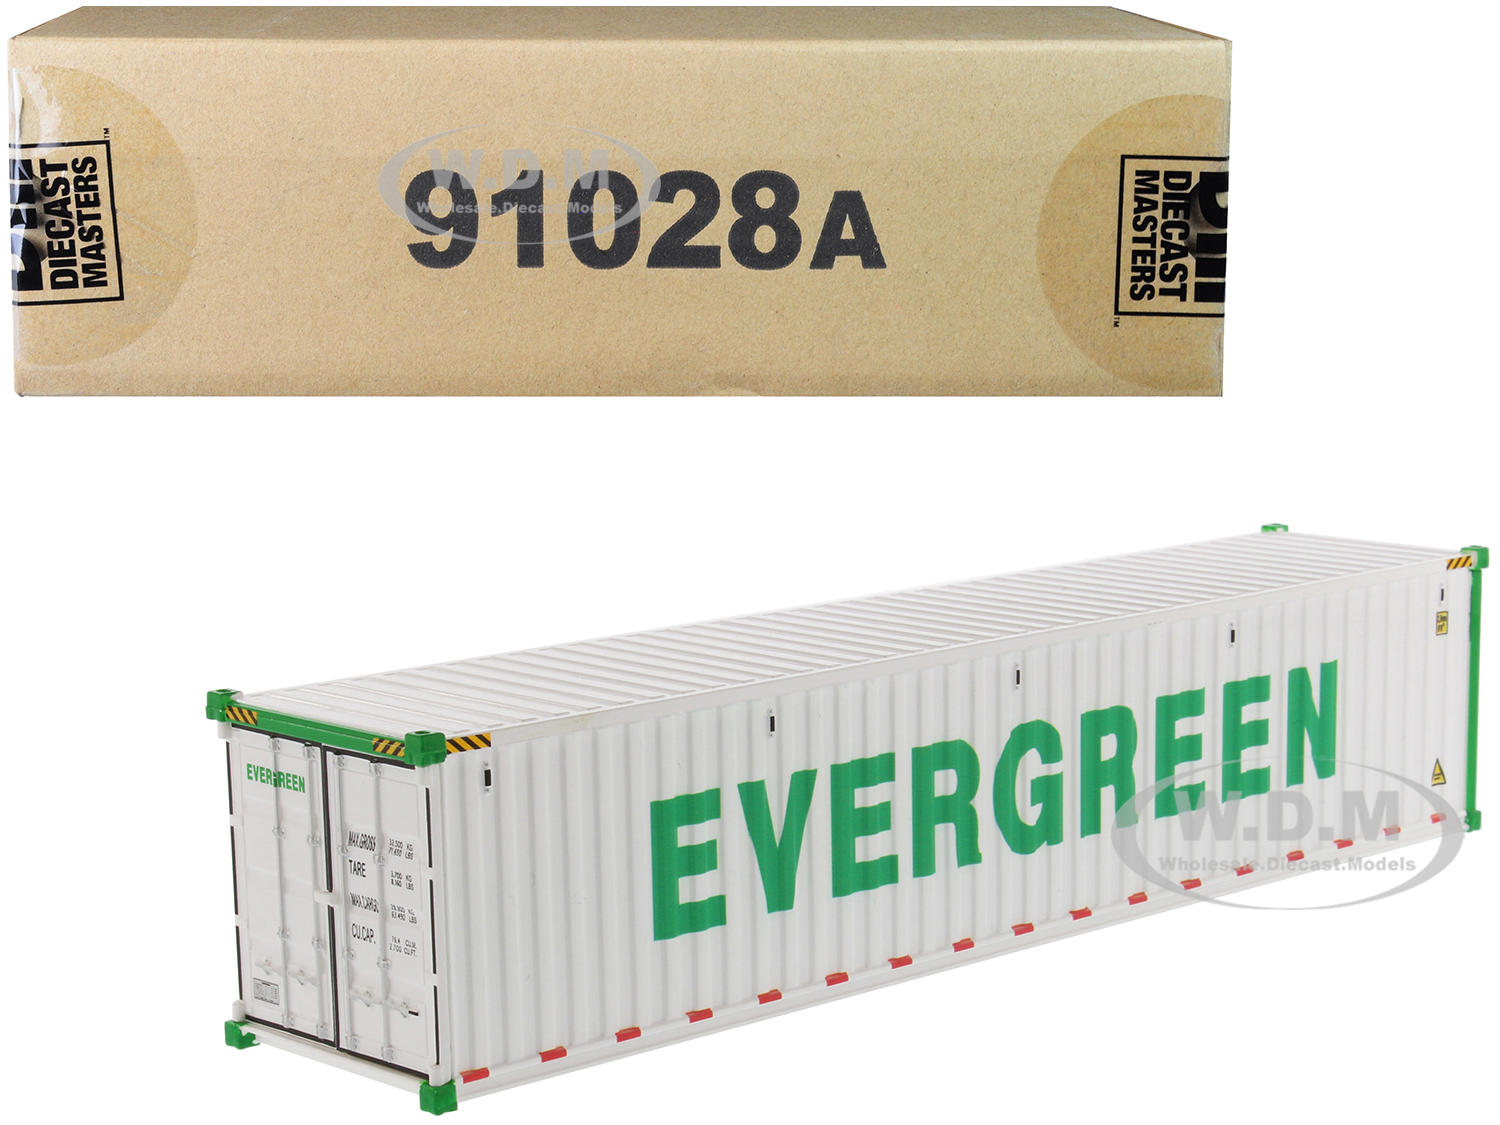 40 Refrigerated Sea Container "EverGreen" White "Transport Series" 1/50 Model by Diecast Masters